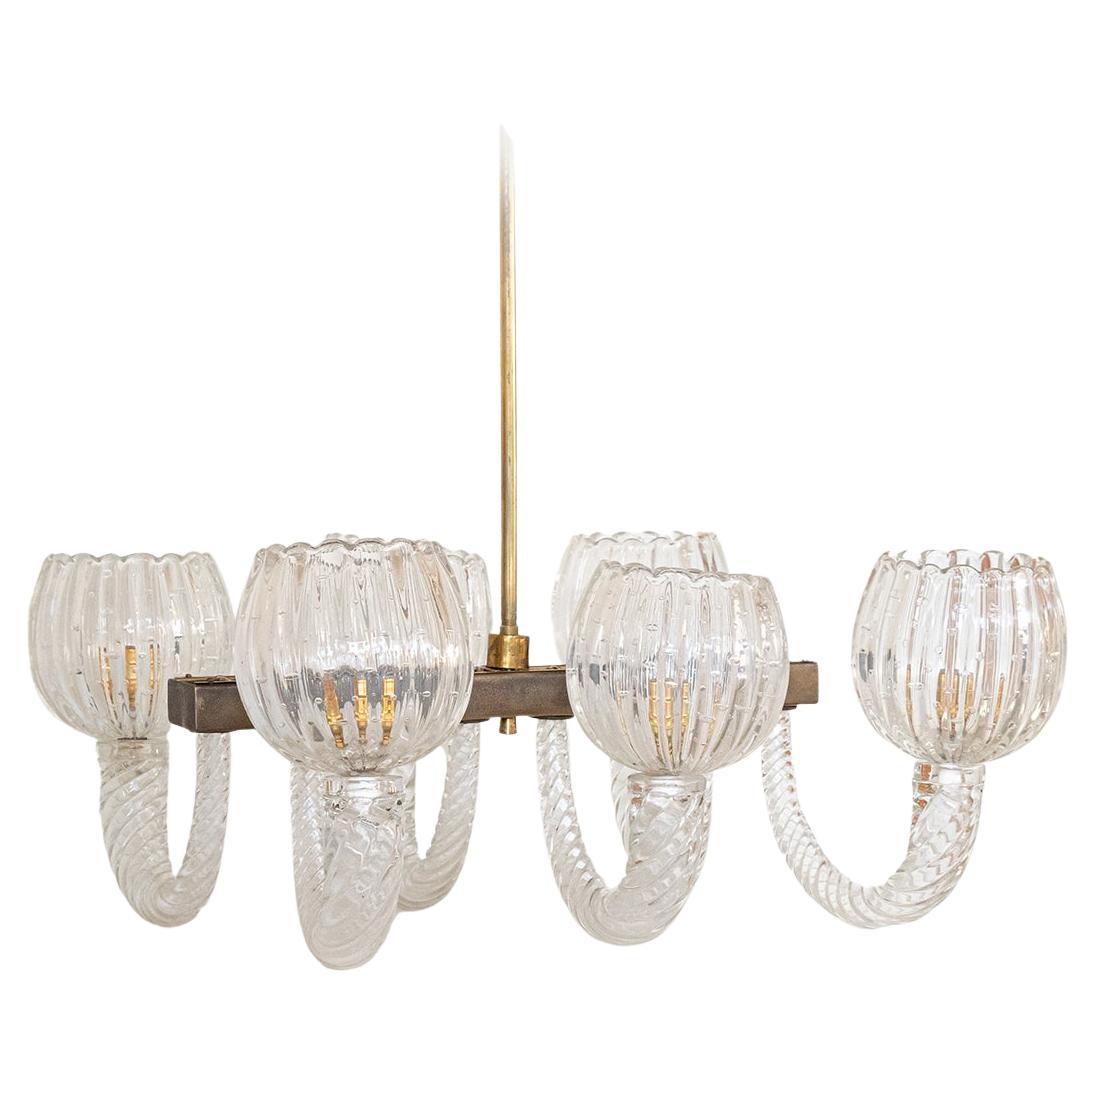 Impressive and large 1940's Barovier glass chandelier from Italy, 1940's. Six thick twisted glass arms arch out from an antiqued brass center, each holding a clear ribbed glass dome shade with scalloped lip. Beautiful clear bubbled glass is all